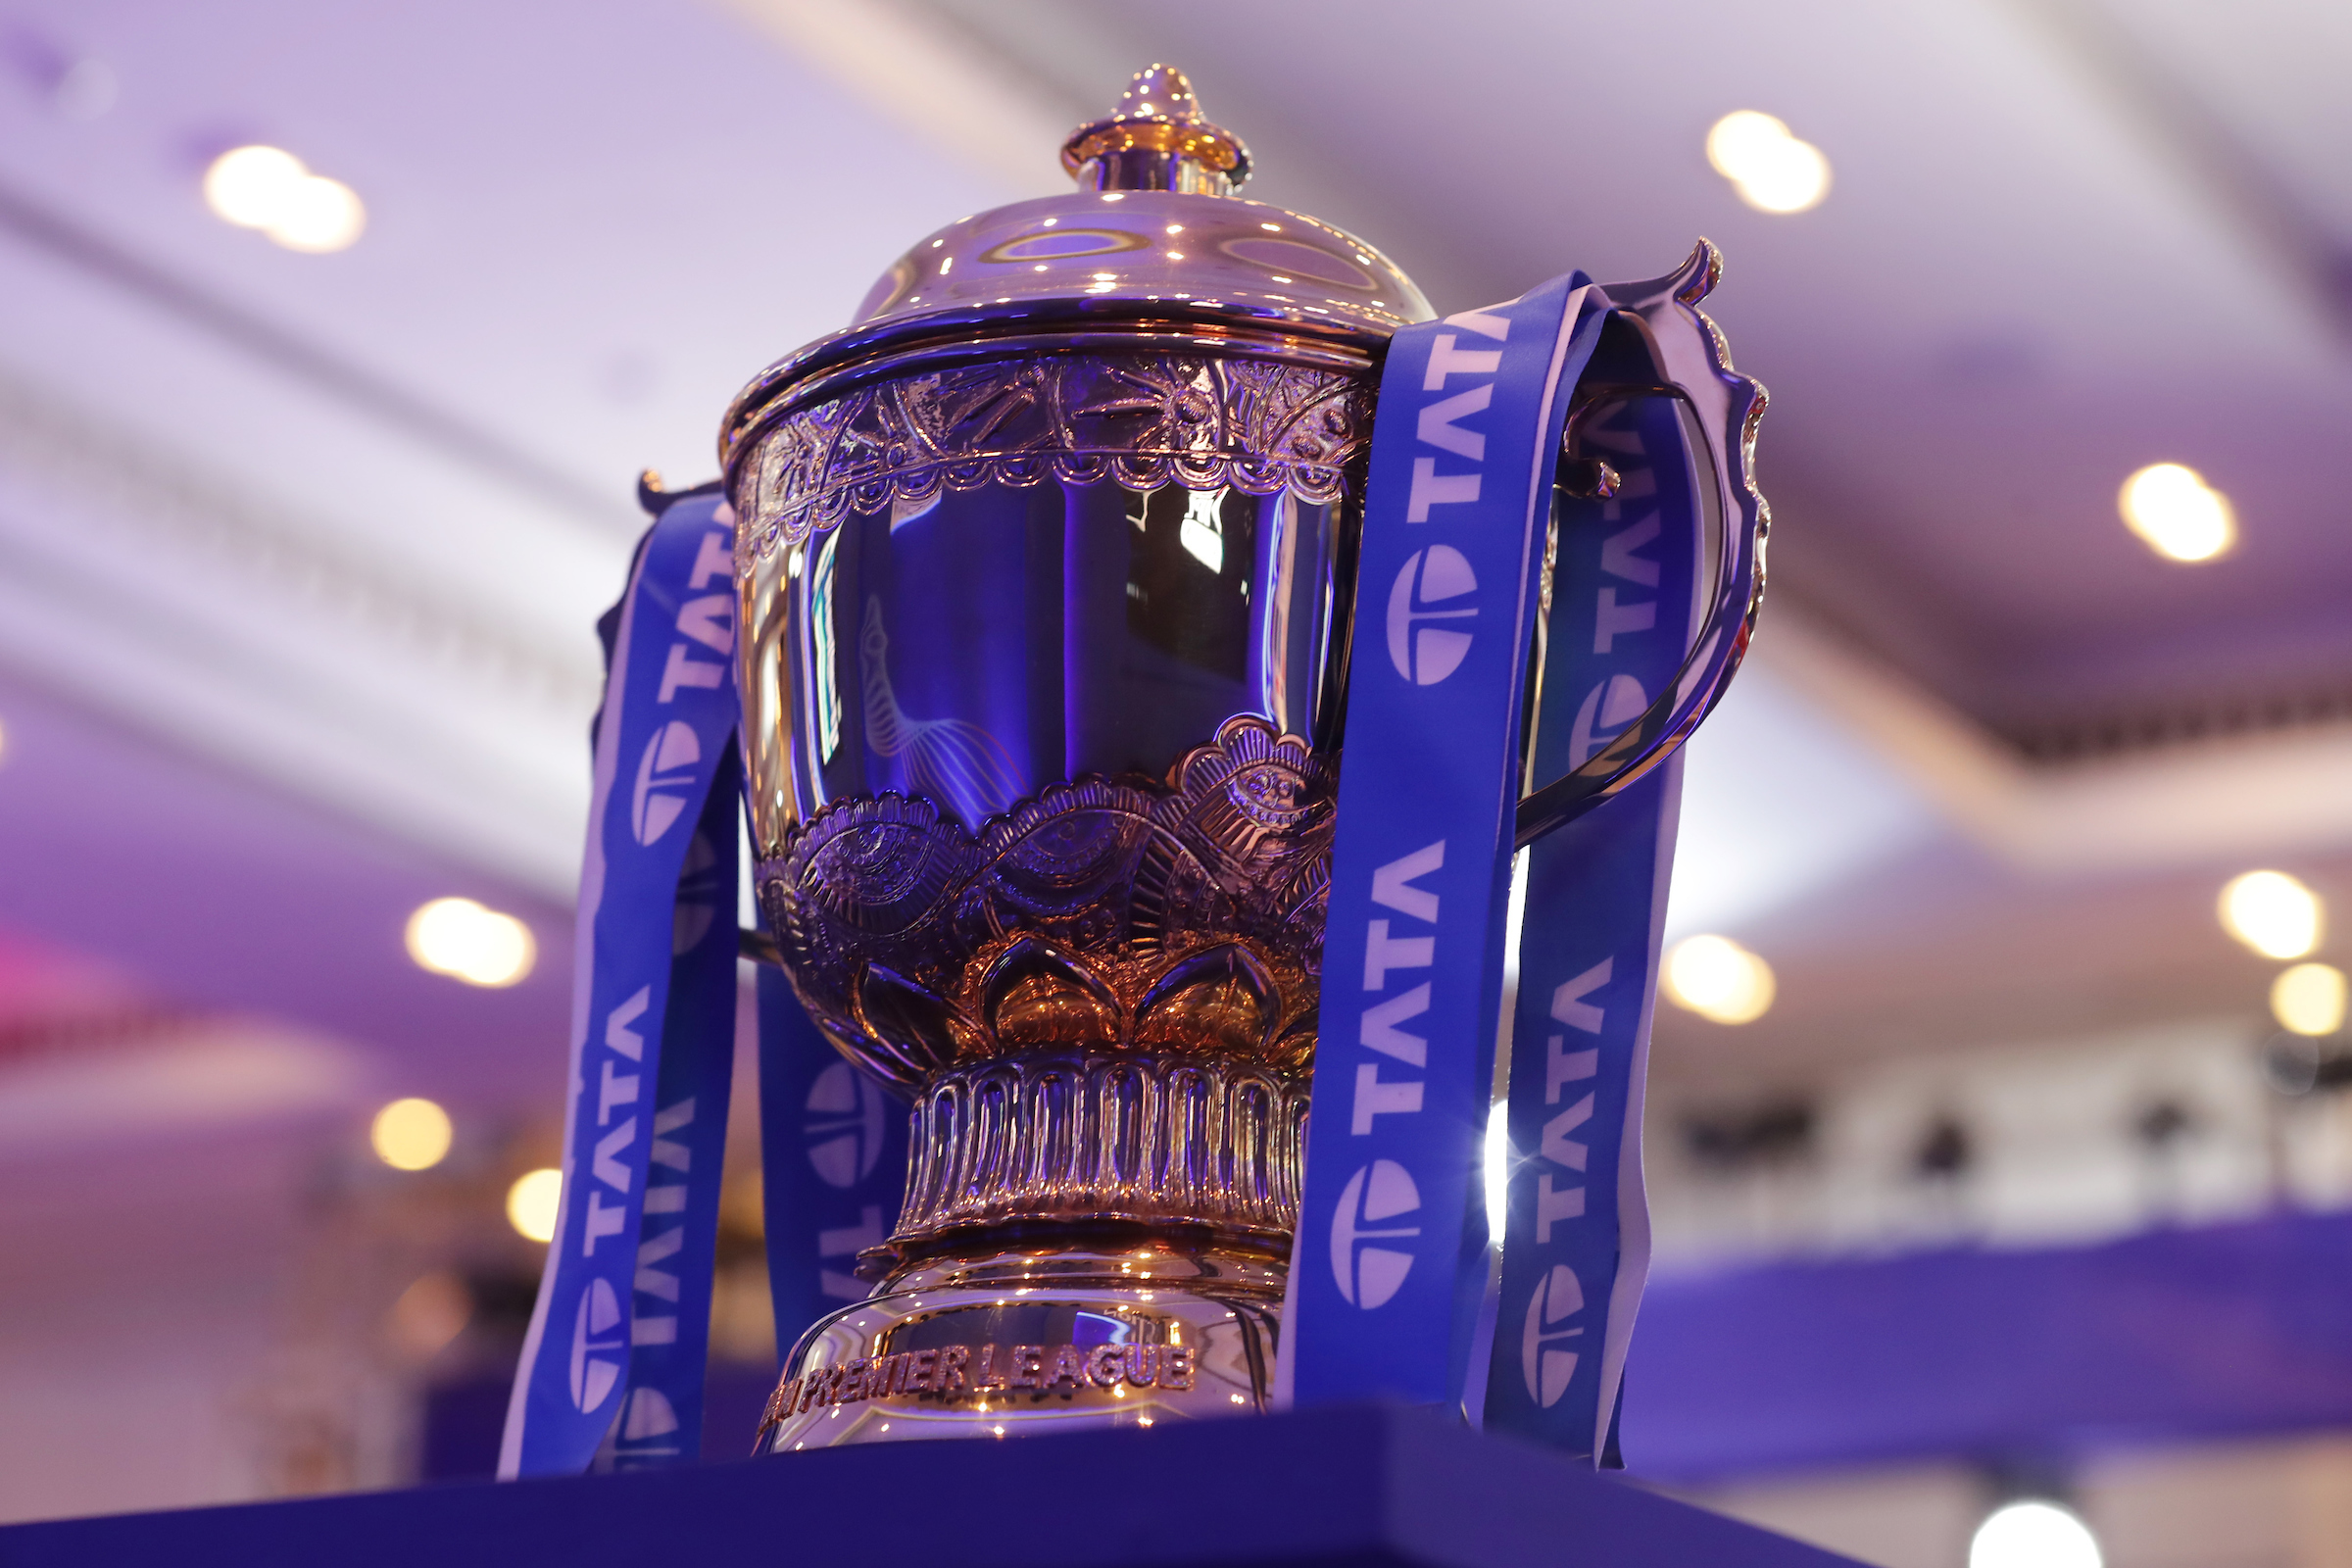 TATA IPL 2022 BCCI releases detailed schedule; CSK and KKR to play first match